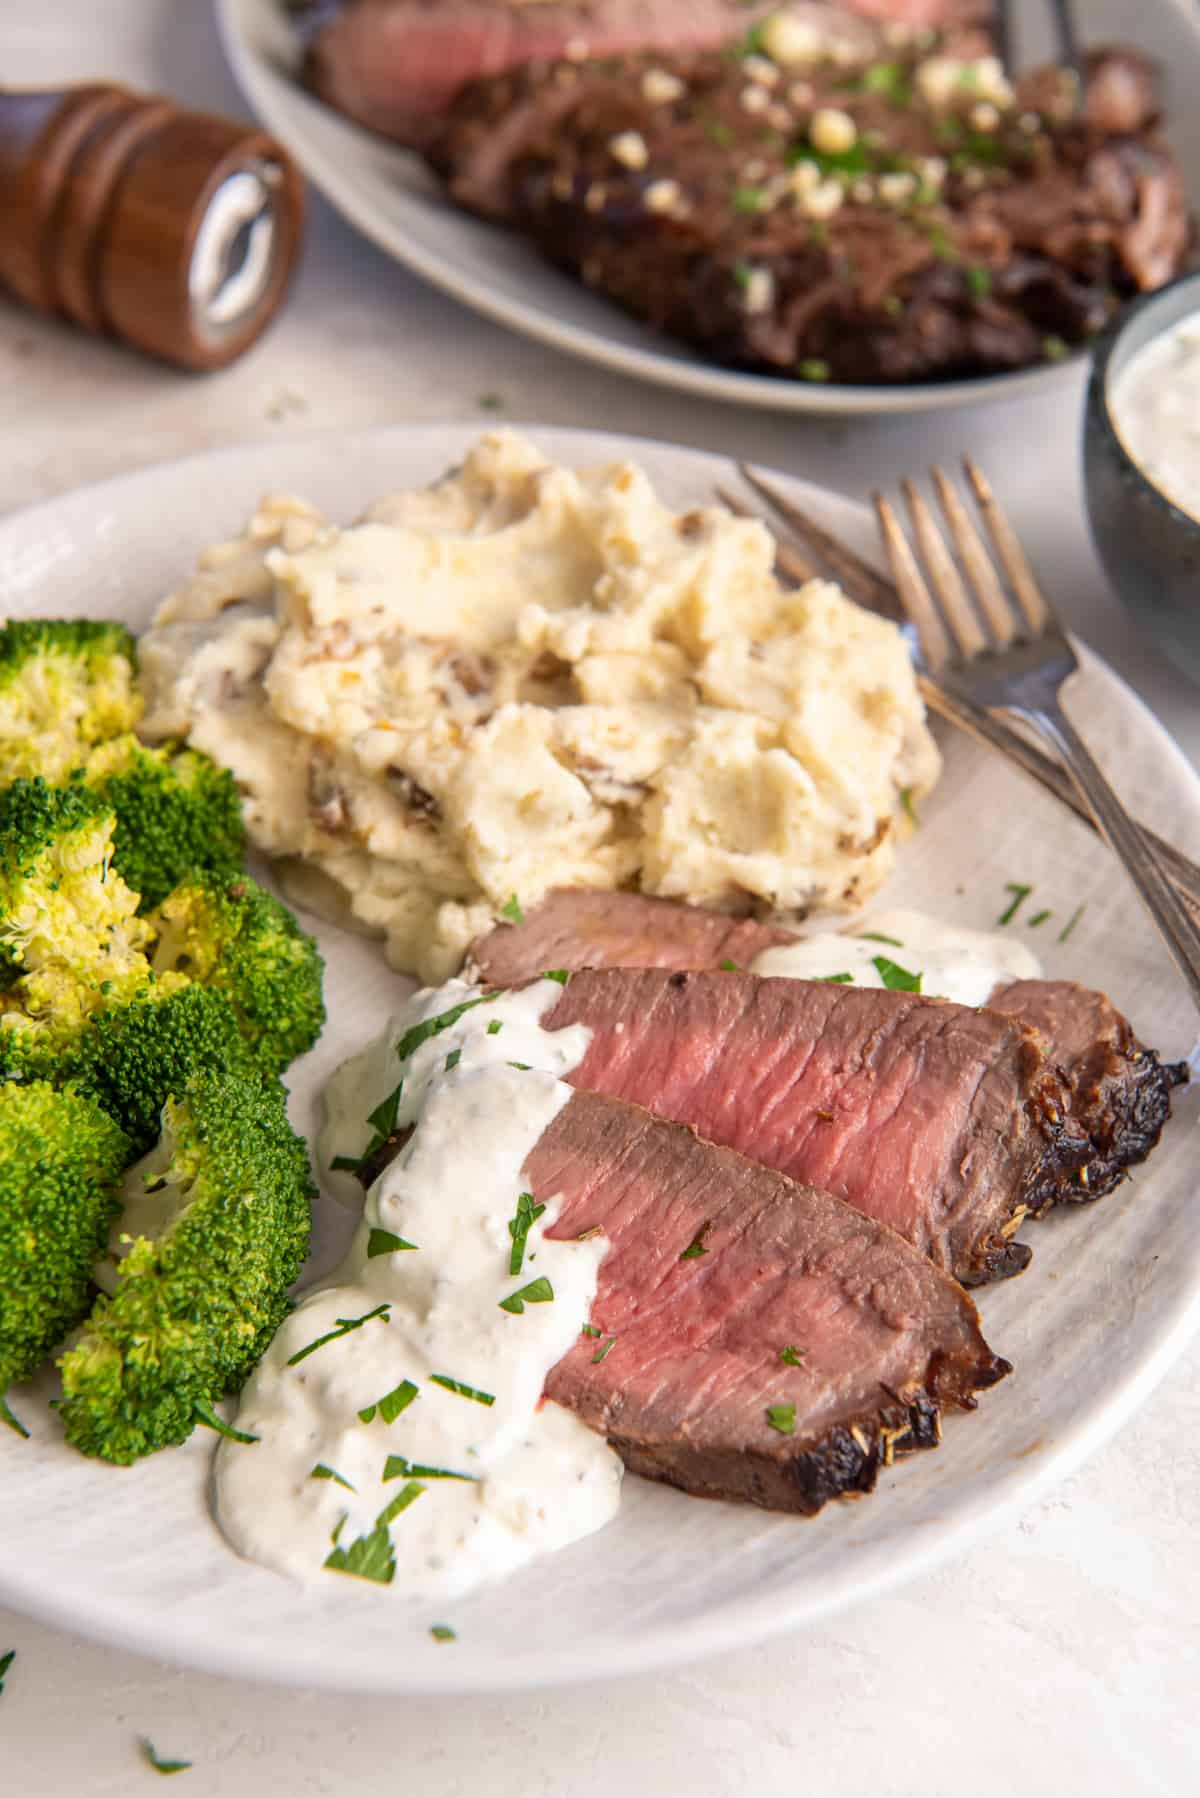 Slices of London Boil topped with a creamy sauce on a white plate with broccoli and mashed potatoes.